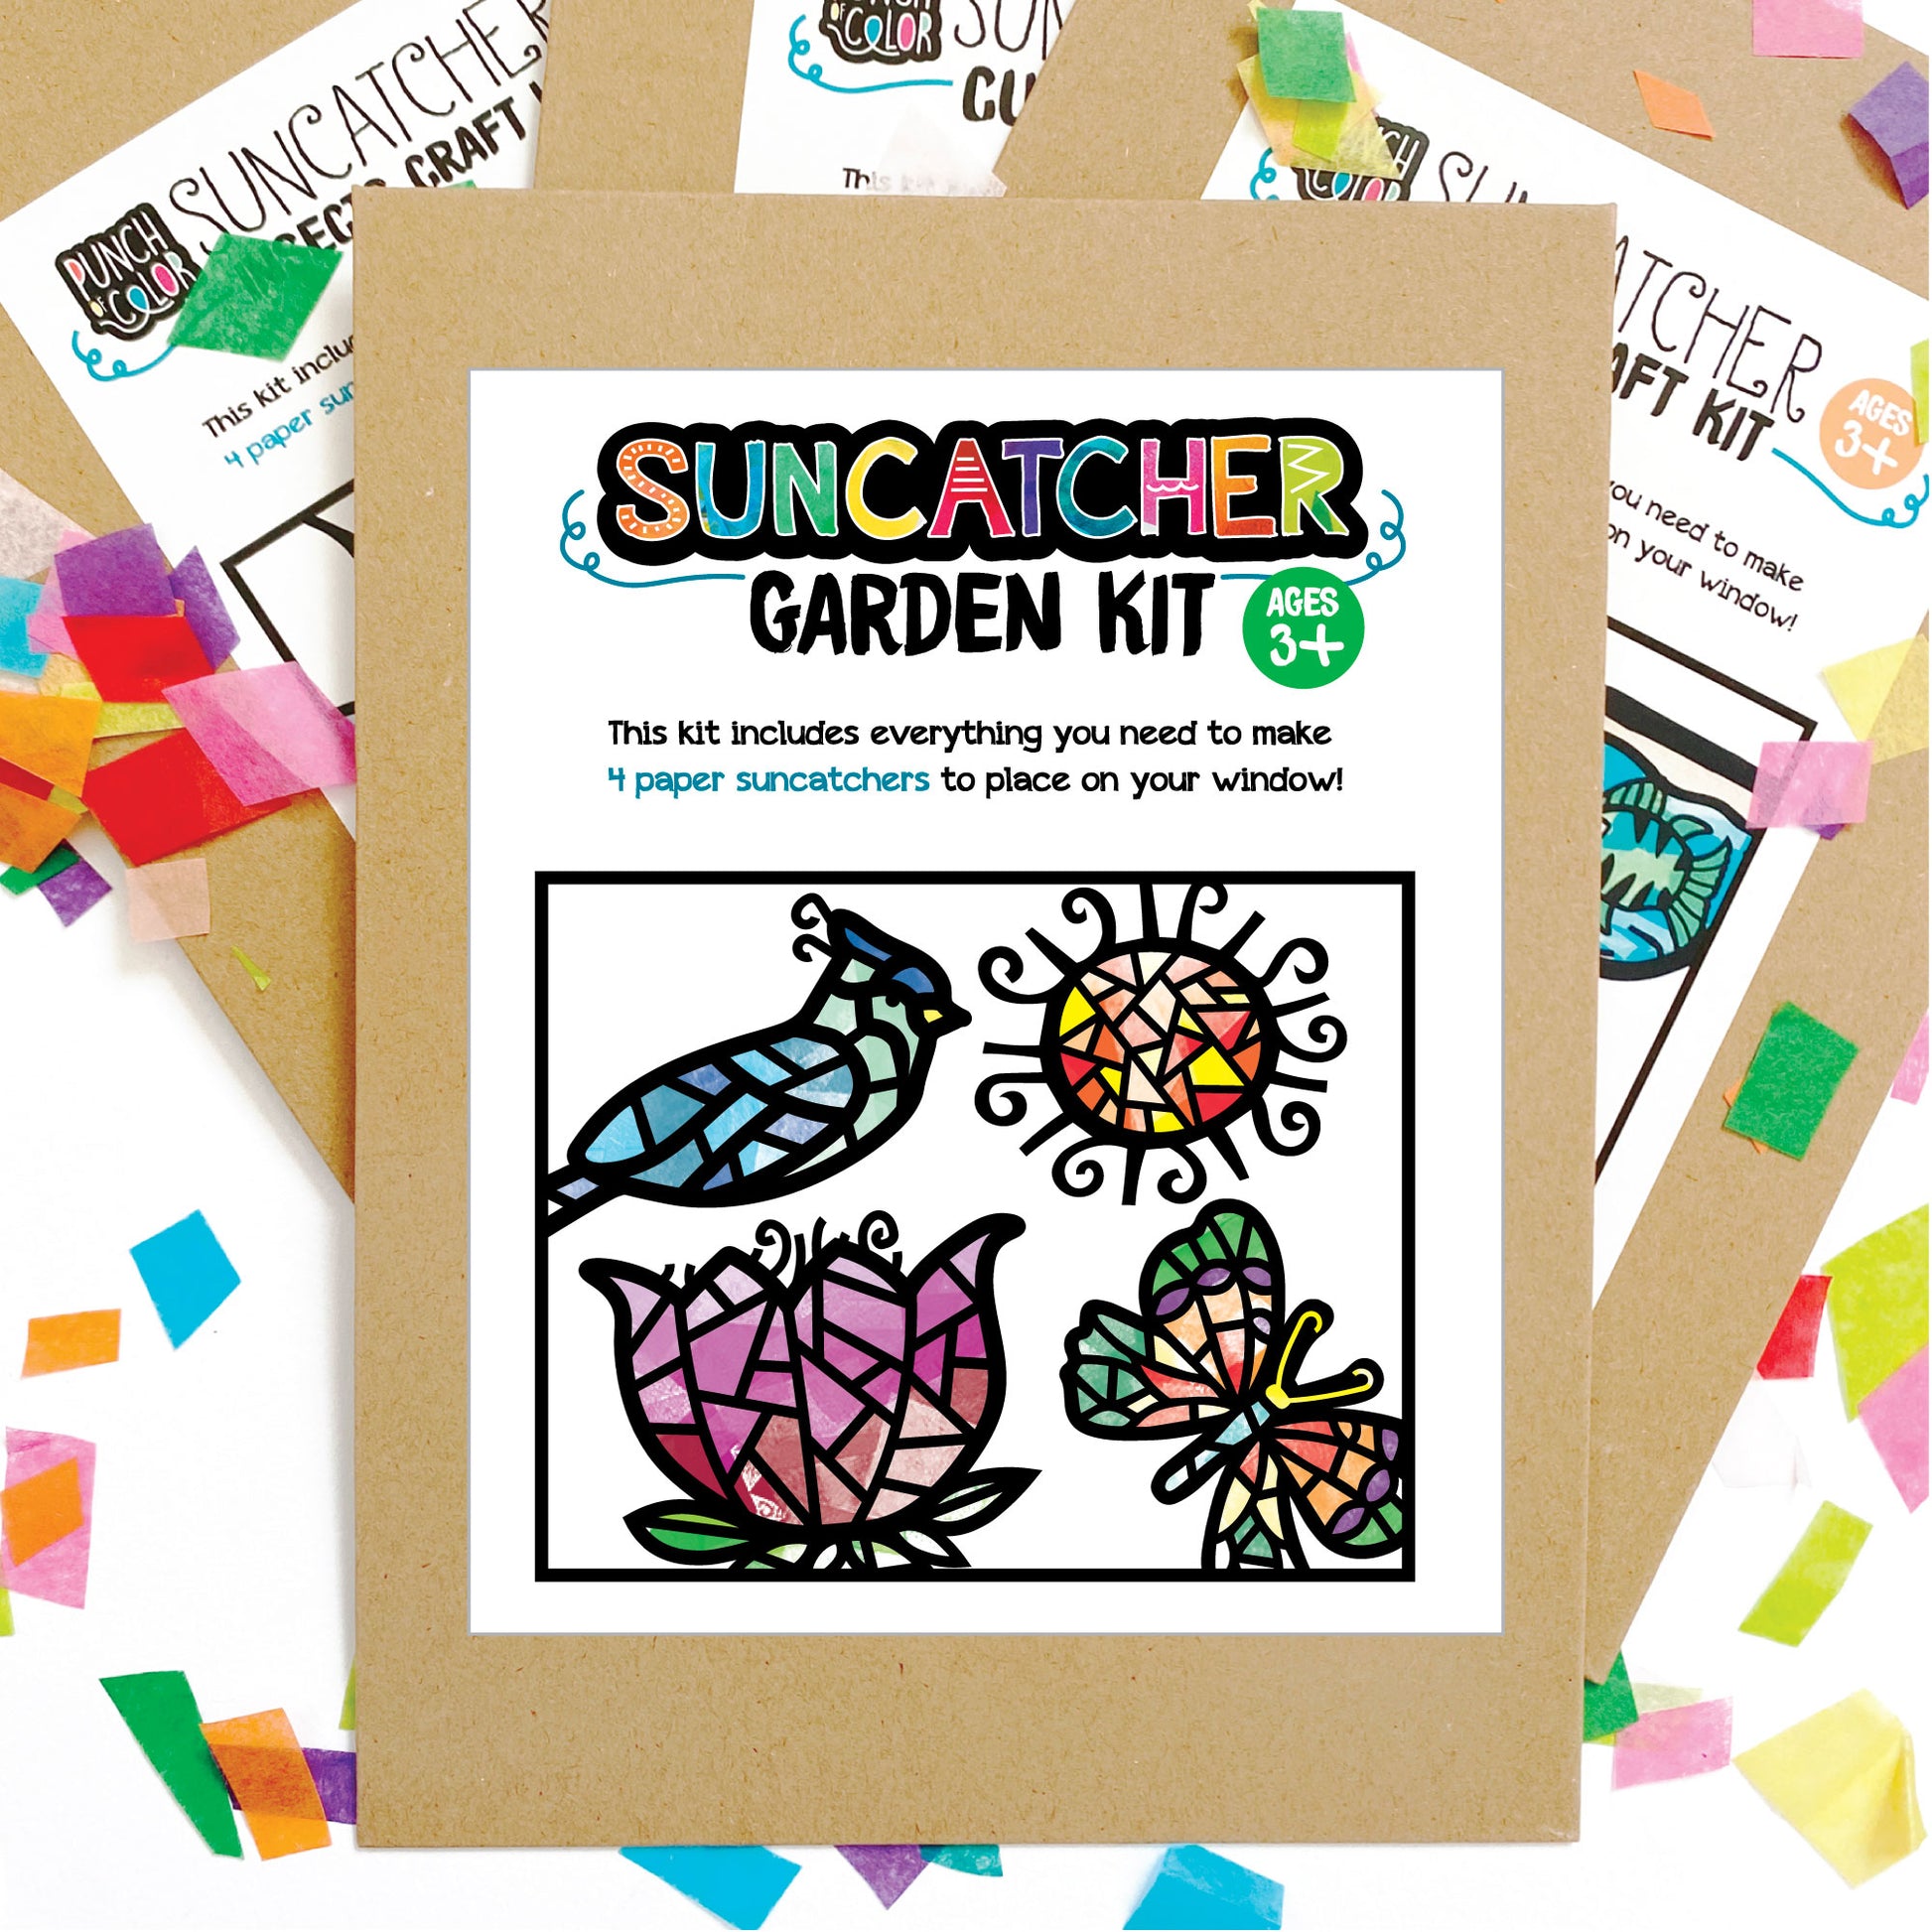 Garden themed suncatcher arts and crafts kit, a mess-free paper based activity for toddlers and kids.